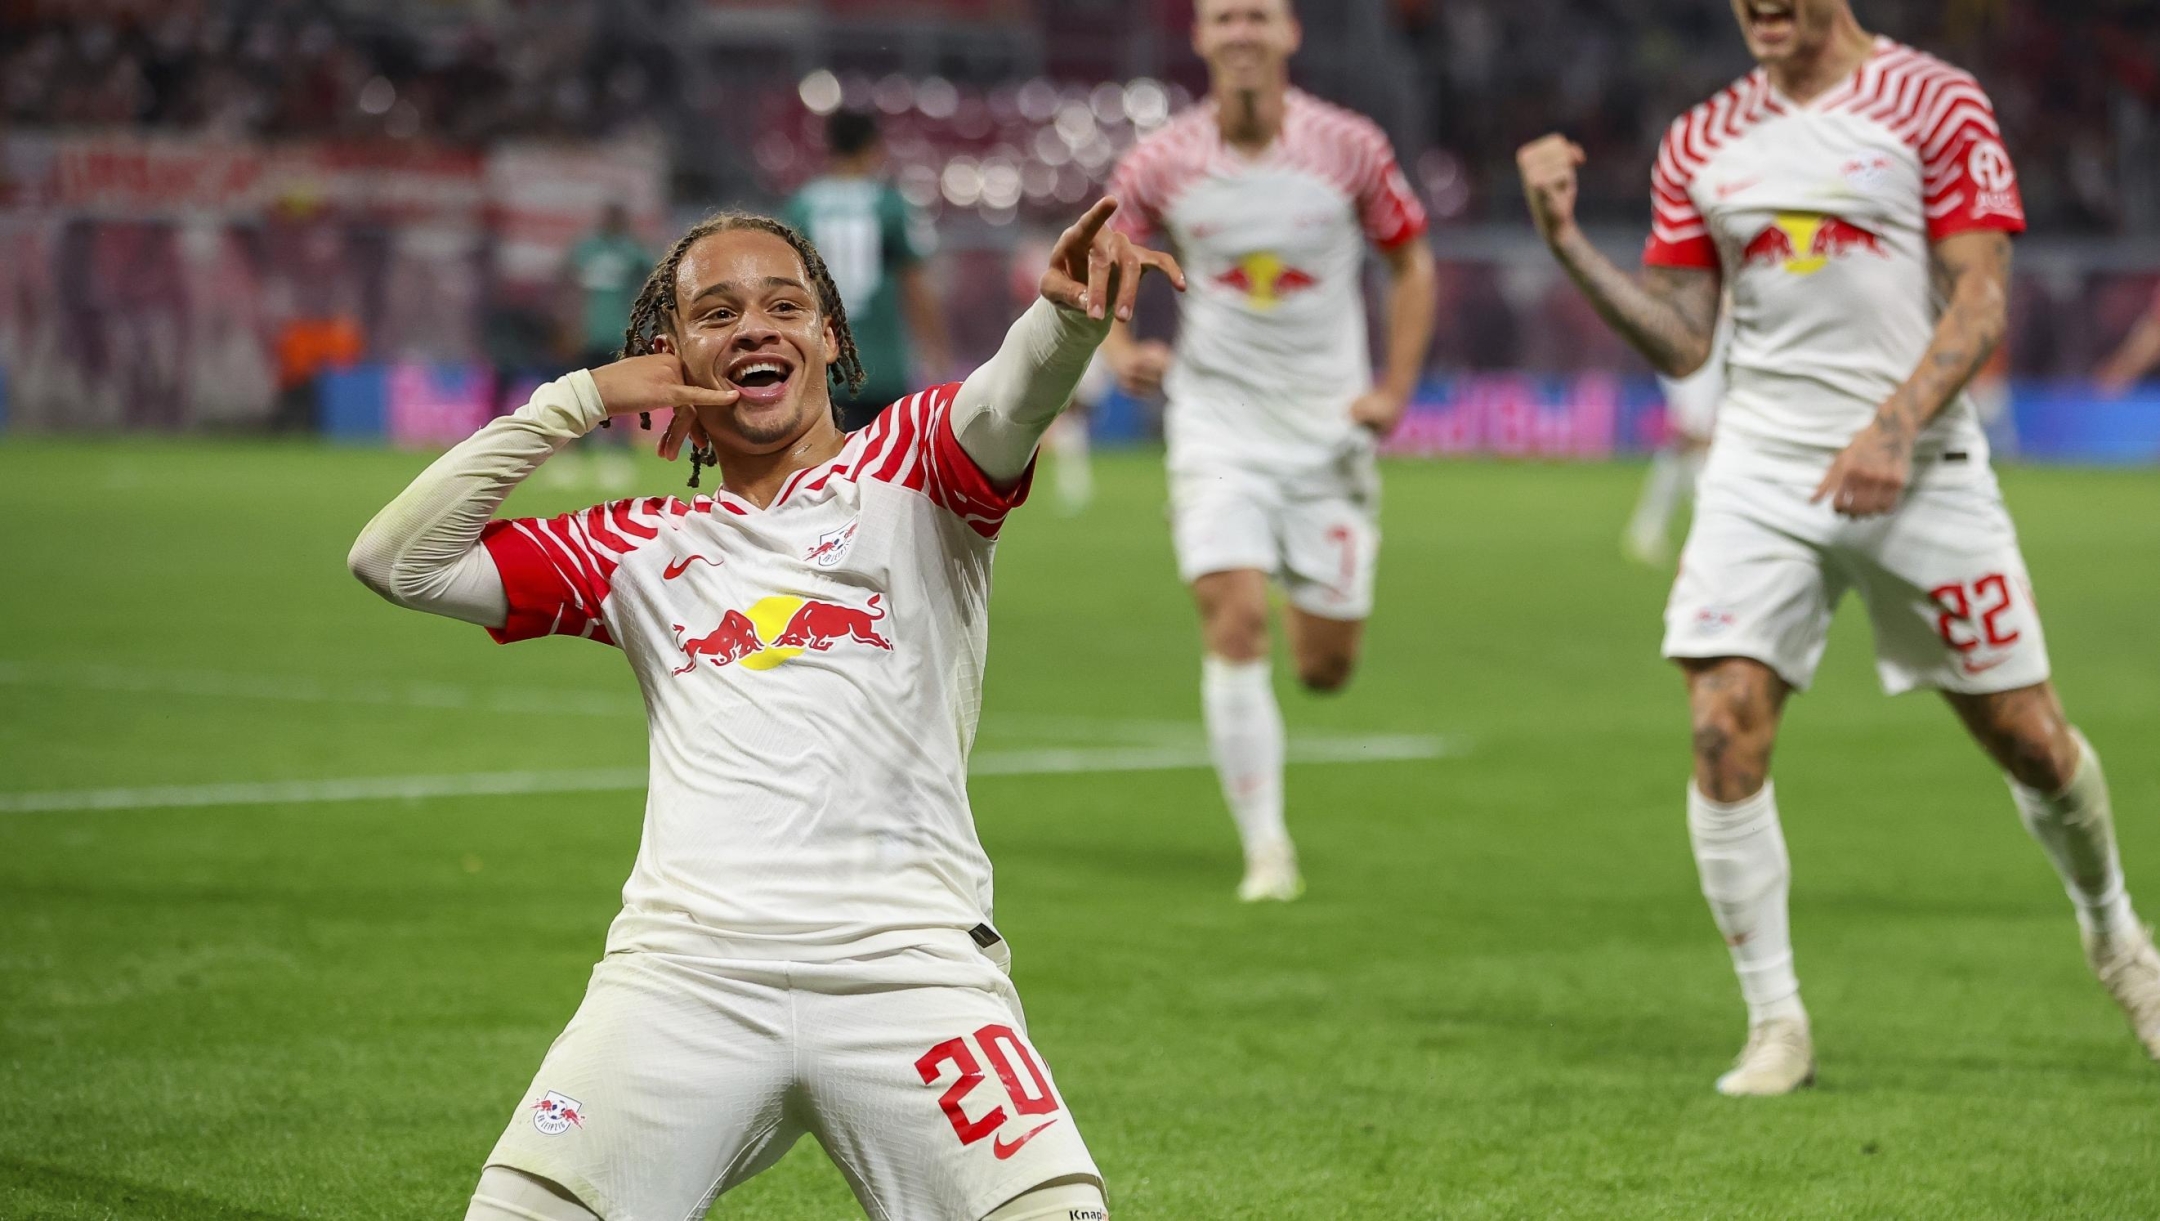 Leipzig player Xavi Simons celebrates scoring his side's fifth goal of the game during the German Bundesliga soccer match between RB Leipzig and VfB Stuttgart at the Red Bull Arena in Leipzig, Germany, Friday, Aug. 25, 2023. (Jan Woitas/dpa via AP)